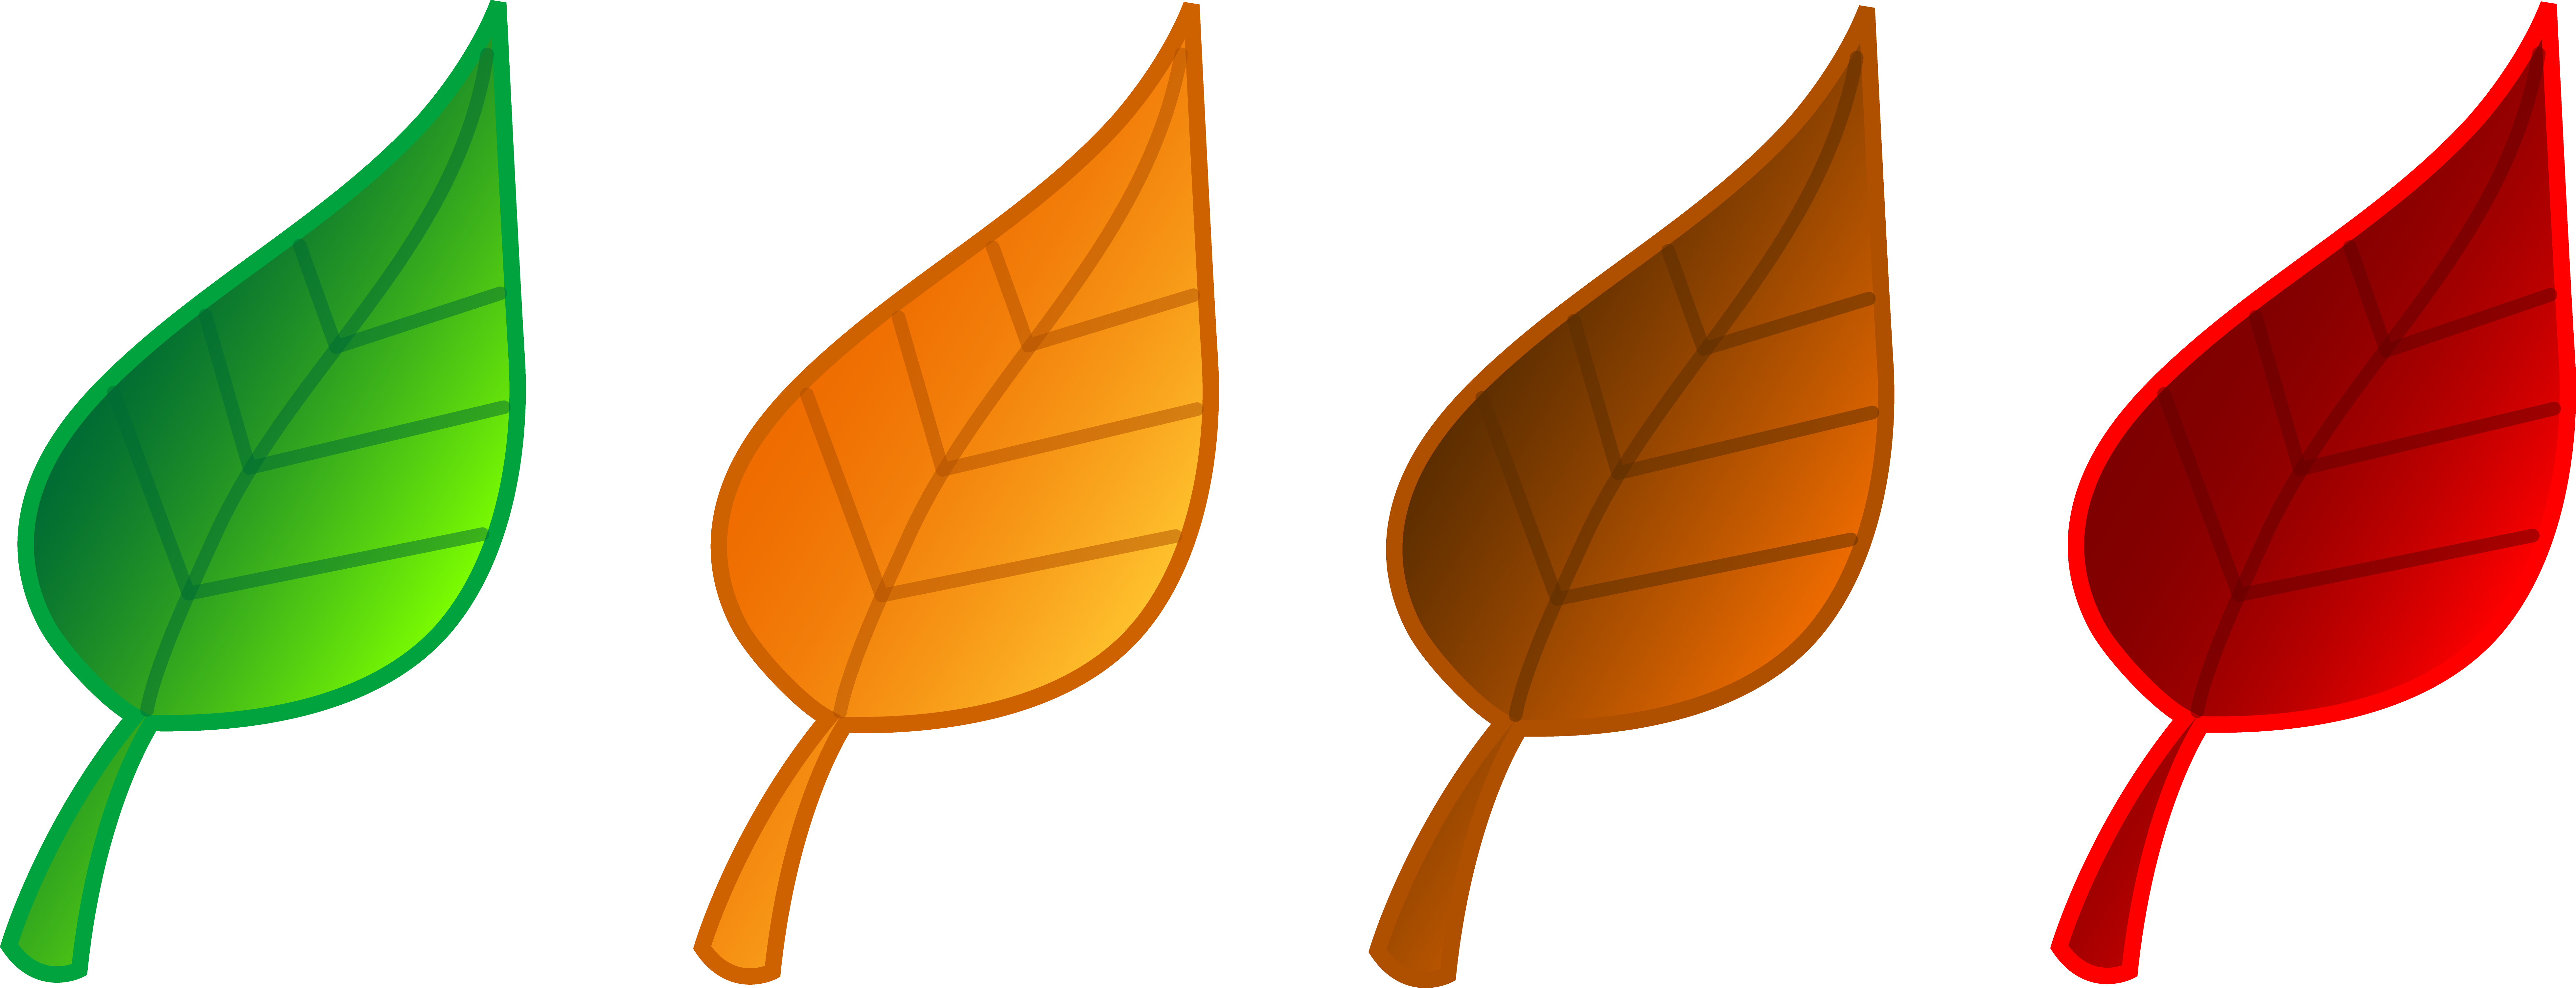 Yellow Leaf Images Hd Image Clipart